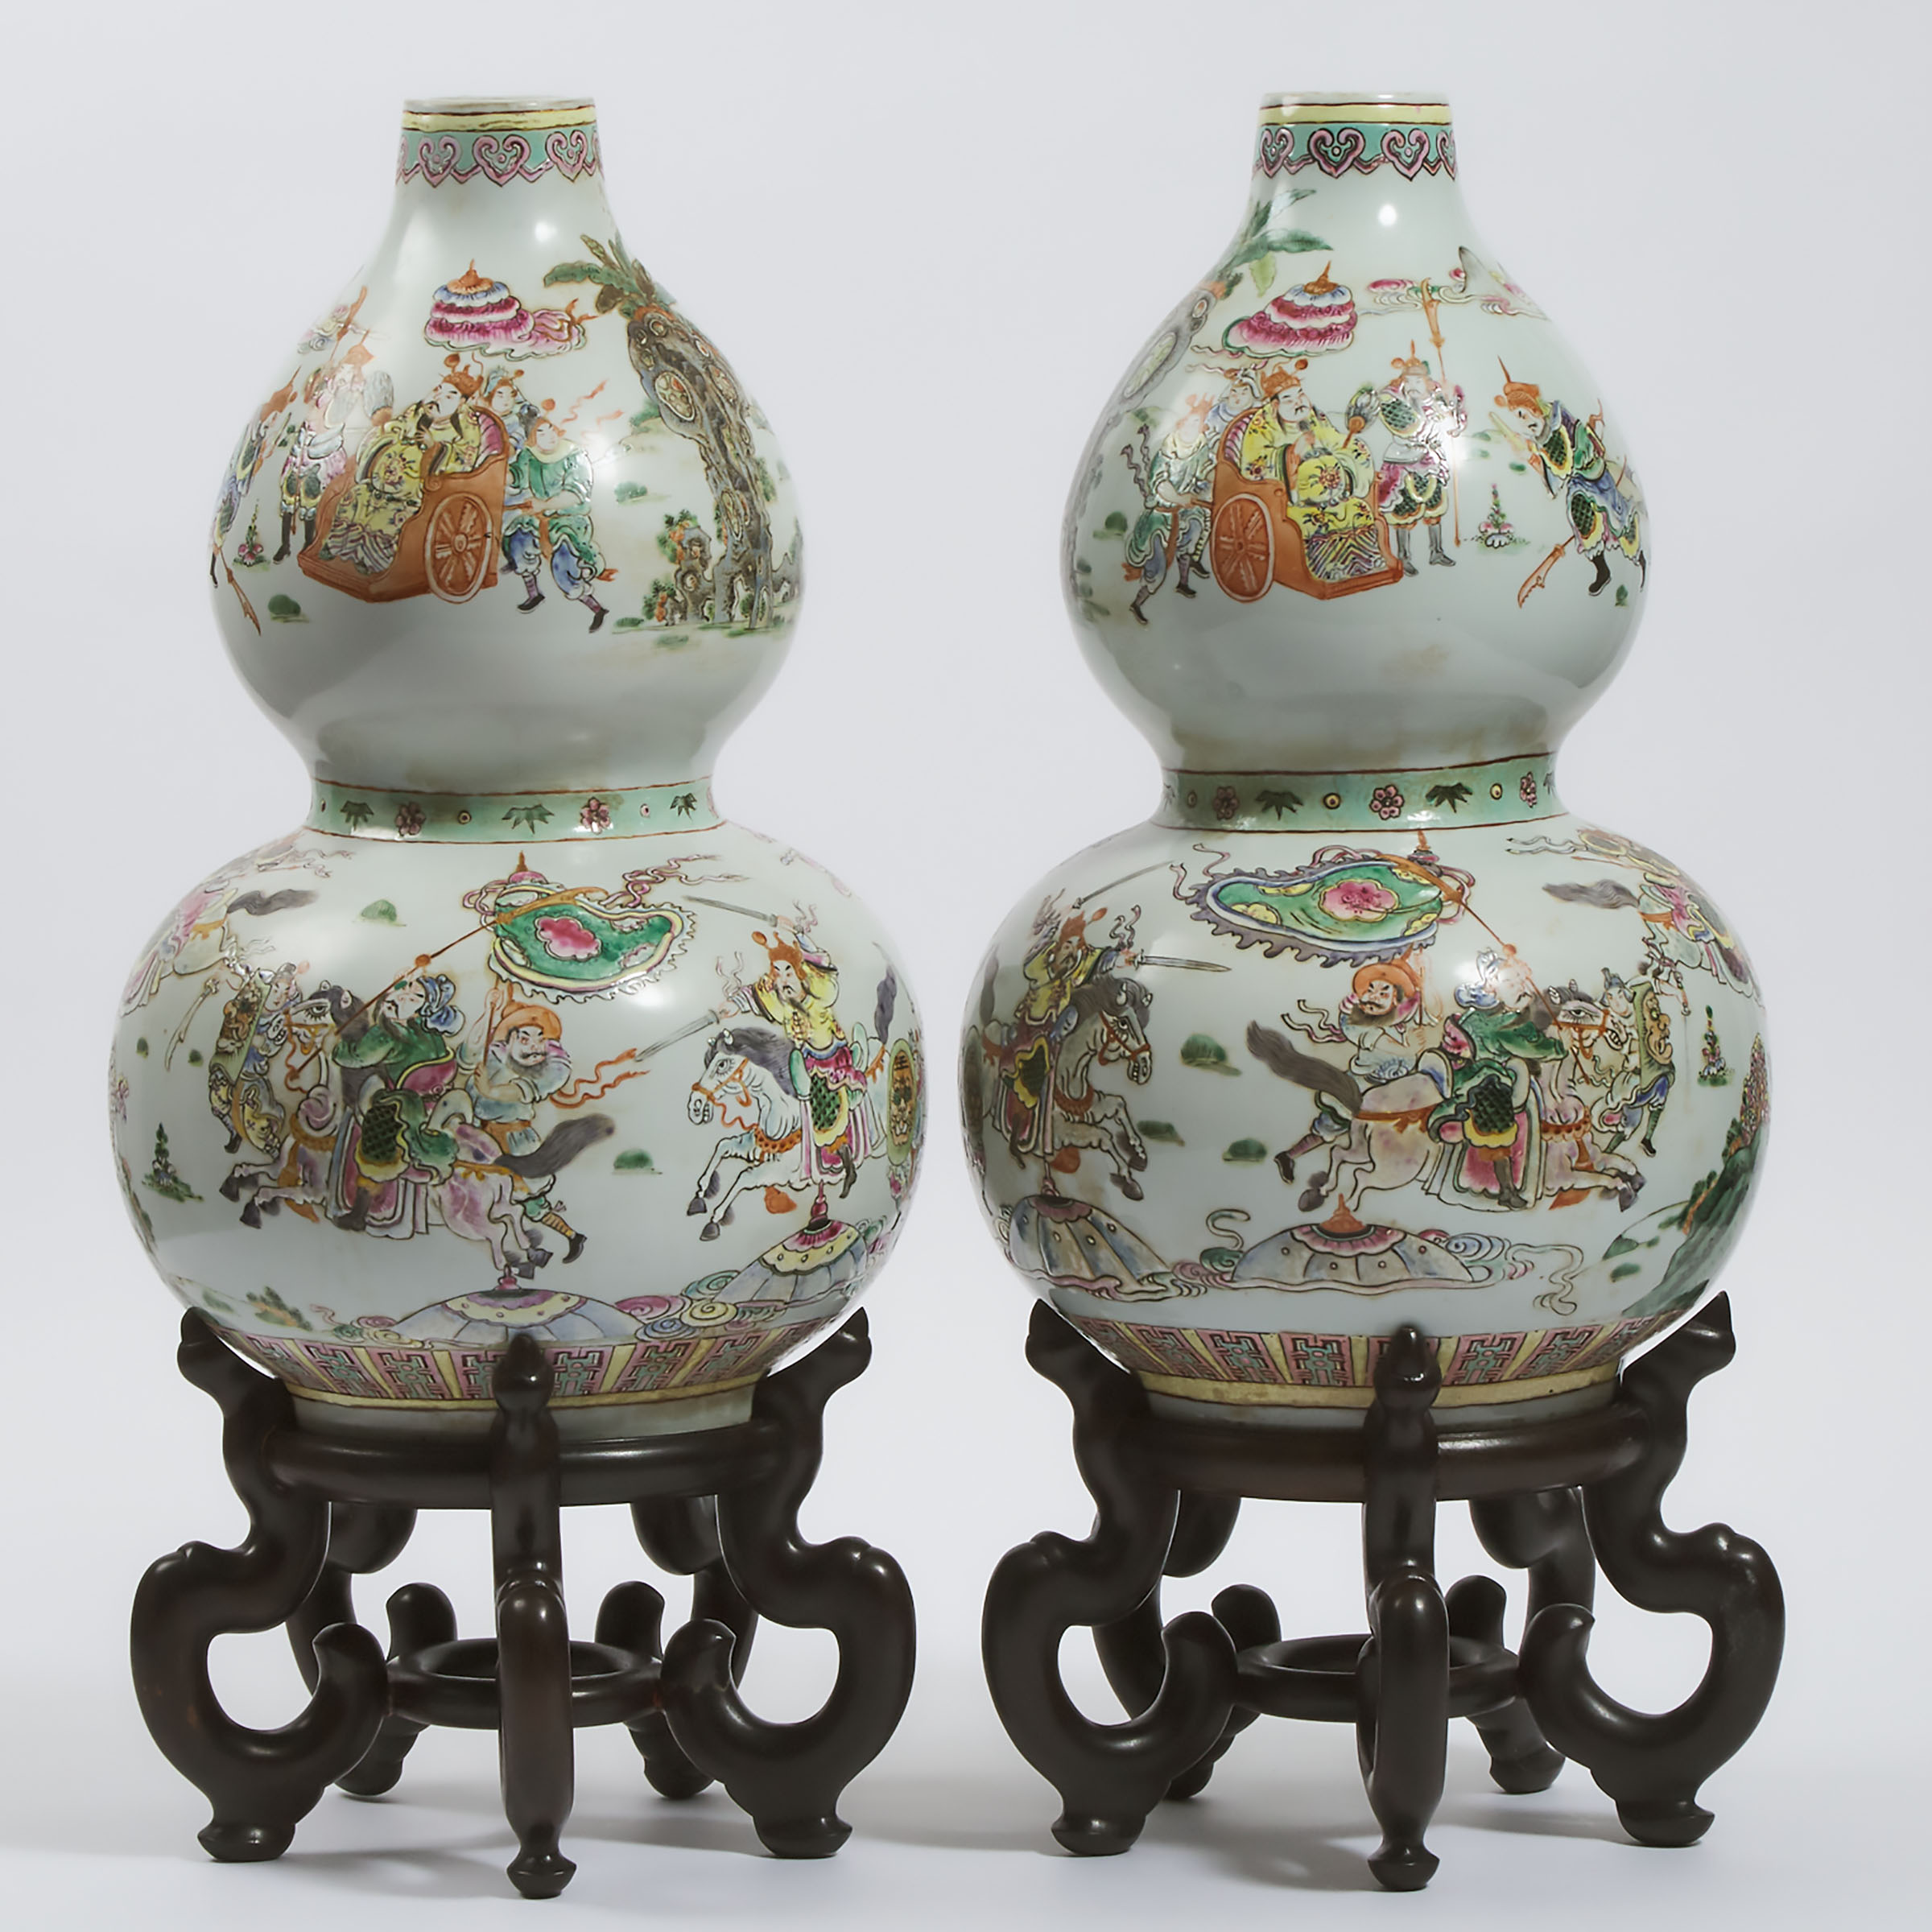 A Pair of Famille Rose Double-Gourd Vases, Mid 20th Century